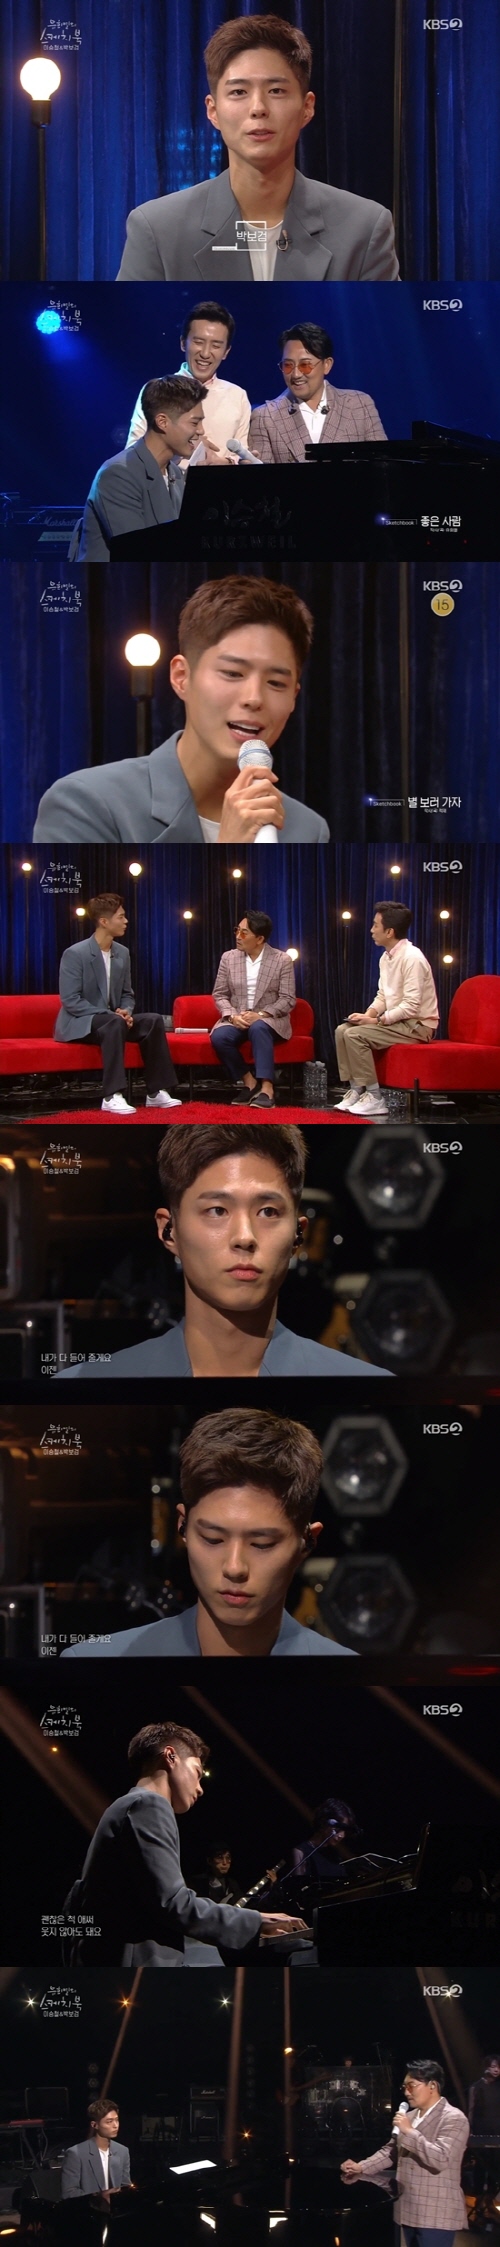 Actor Park Bo-gum emits a variety of charms from You Hee-yeols Sketchbook to Itaewon Clath.Park Bo-gum appeared on KBS 2TV You Hee-yeols Sketchbook on the 20th with Lee Seung-cheol, who celebrated his 35th anniversary.Lee Seung-cheol and Park Bo-gum have formed a relationship with the singer as the main character of the music video on the webtoon Moonlight Sculptor OST I Love You Much released in January this year.Park Bo-gum set up a joint stage with Lee Seung-cheol, skillfully digesting the Piano accompaniment of I Love You Much.You Hee-yeol asked to play Piano, saying, I didnt know you were playing Piano so well, please do one more.Park Bo-gum boasted a high-quality singing ability with Lee Seung-cheols Western Sky and Toys Good Man Piano accompaniment Love Live!He also played Chopstick March with the exhilarated You Hee-yeol, and also showed the load of Lets go to the stars Love Live!, which was called in the ad.My senior first offered me a proposal and it was so glorious and I was so happy to appear as Sketchbook; I was so nervous that I fell asleep, Park Bo-gum confessed.Lee Seung-cheol praised the band, saying, I first hit with the band, but I can not do it except usually.When Park Bo-gum, who showed off his outstanding skills, asked if he had any plans to debut as a singer, Park Bo-gum said, It is still a lot short of singer debut.I do not have a plan, but I am faithful to acting and I often want to meet fans. If you boasted your singing and piano skills with You Hee-yeols Sketchbook, this time you will find your audience with your main act.Park Bo-gum will make a special appearance at the final episode of JTBC gilt drama Itaewon Clath which is broadcasted on the 21st.Earlier, Itaewon Clath said, Please check it through broadcasting this week.Park Bo-gum has starred in Kim Seong-yoon PDs previous work, Gurmigreen Moonlight, which directs Itaewon Clath.Park Bo-gum decided to appear in the honor of Kim Seong-yoon PD.Itaewon Clath, which includes Park Seo-joon, Kim Dae-mi, Kwon Na-ra and An-hyeon, is gaining popularity with its mid- 10% audience rating.In the final episode, the last rebellion of youths who are united in stubbornness and arrogance is drawn. Attention is drawn to whether he can save Joy Seo, who eventually kneels before Chang.The ending of the 15-year game between Park and Chang also draws attention.Expectations are growing as Park Bo-gum is expected to appear in the final session on the 21st.Photo: KBS Broadcasting Screen